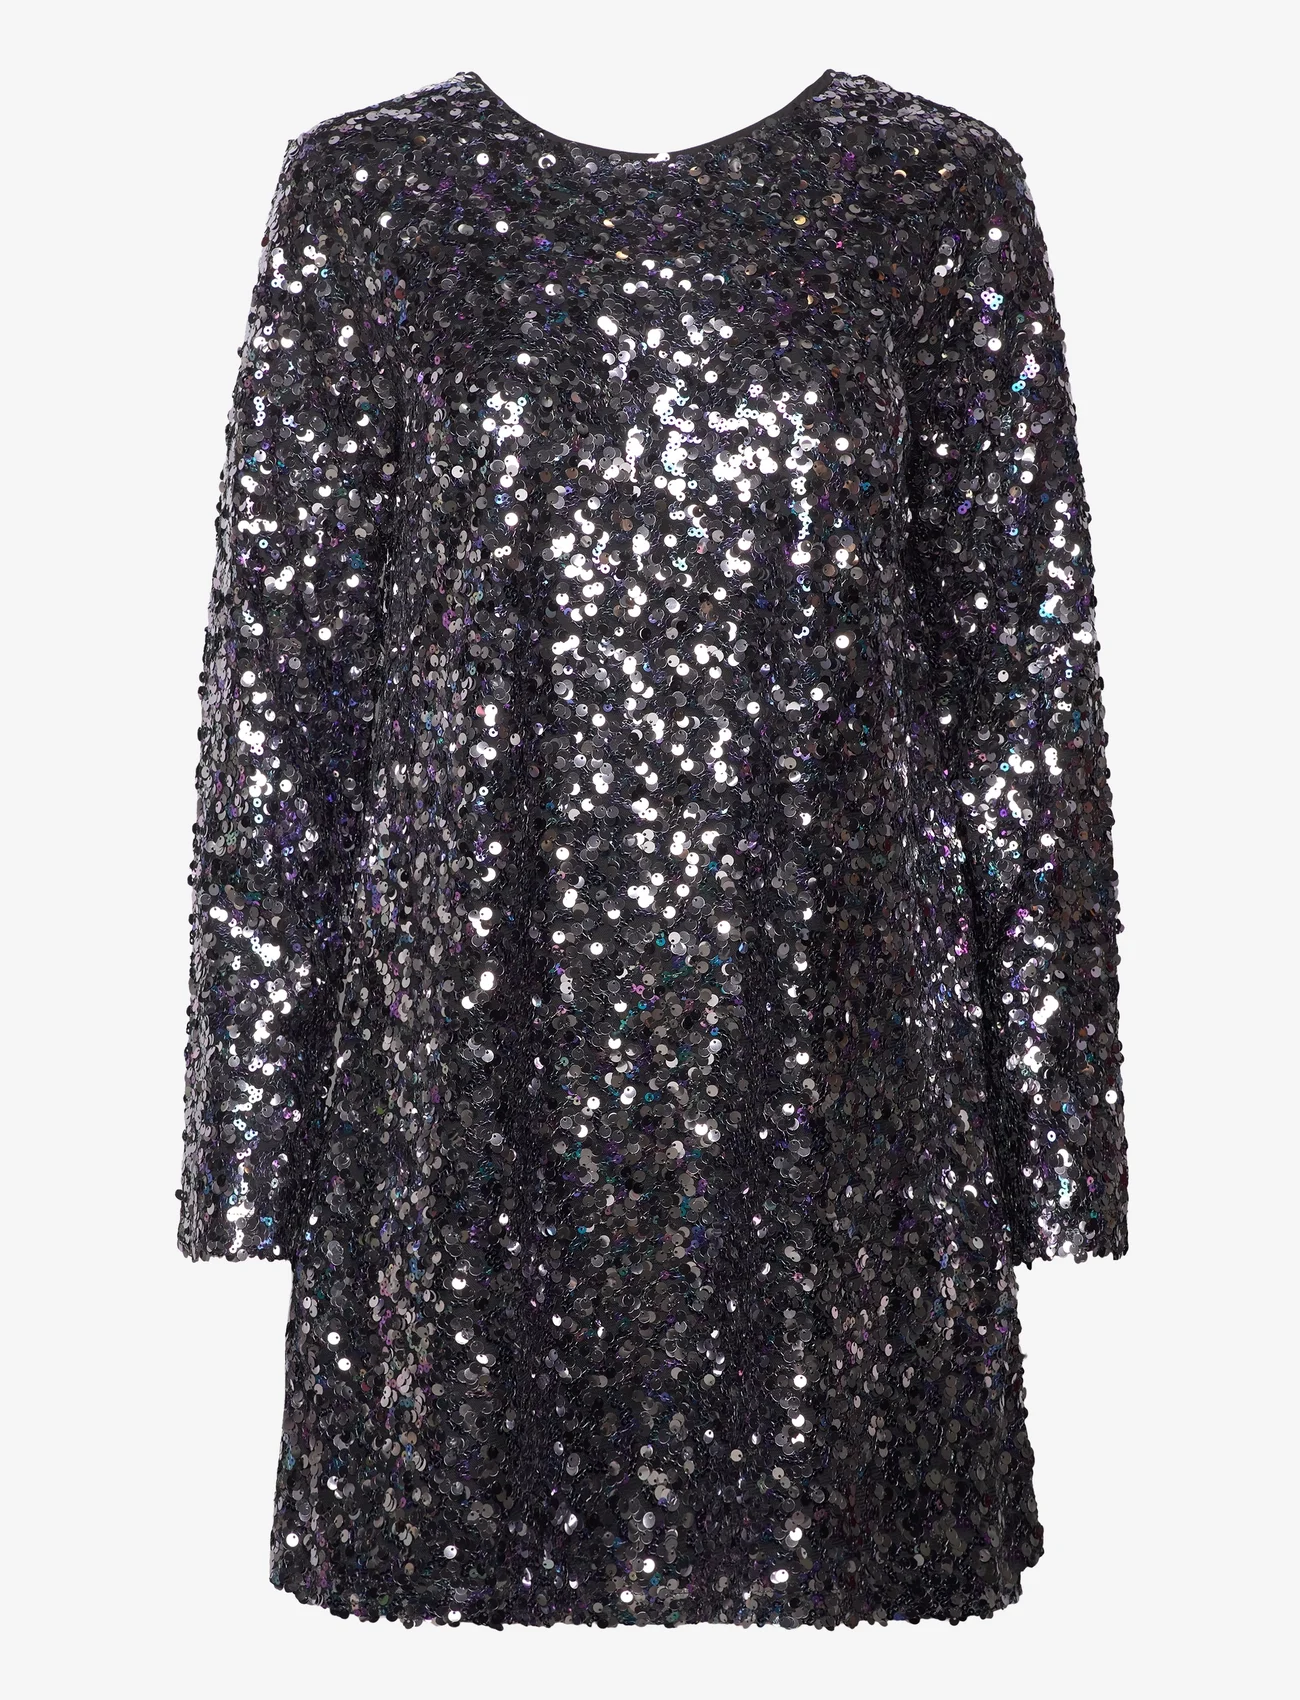 A-View - Sequin dress - peoriided outlet-hindadega - grey - 0